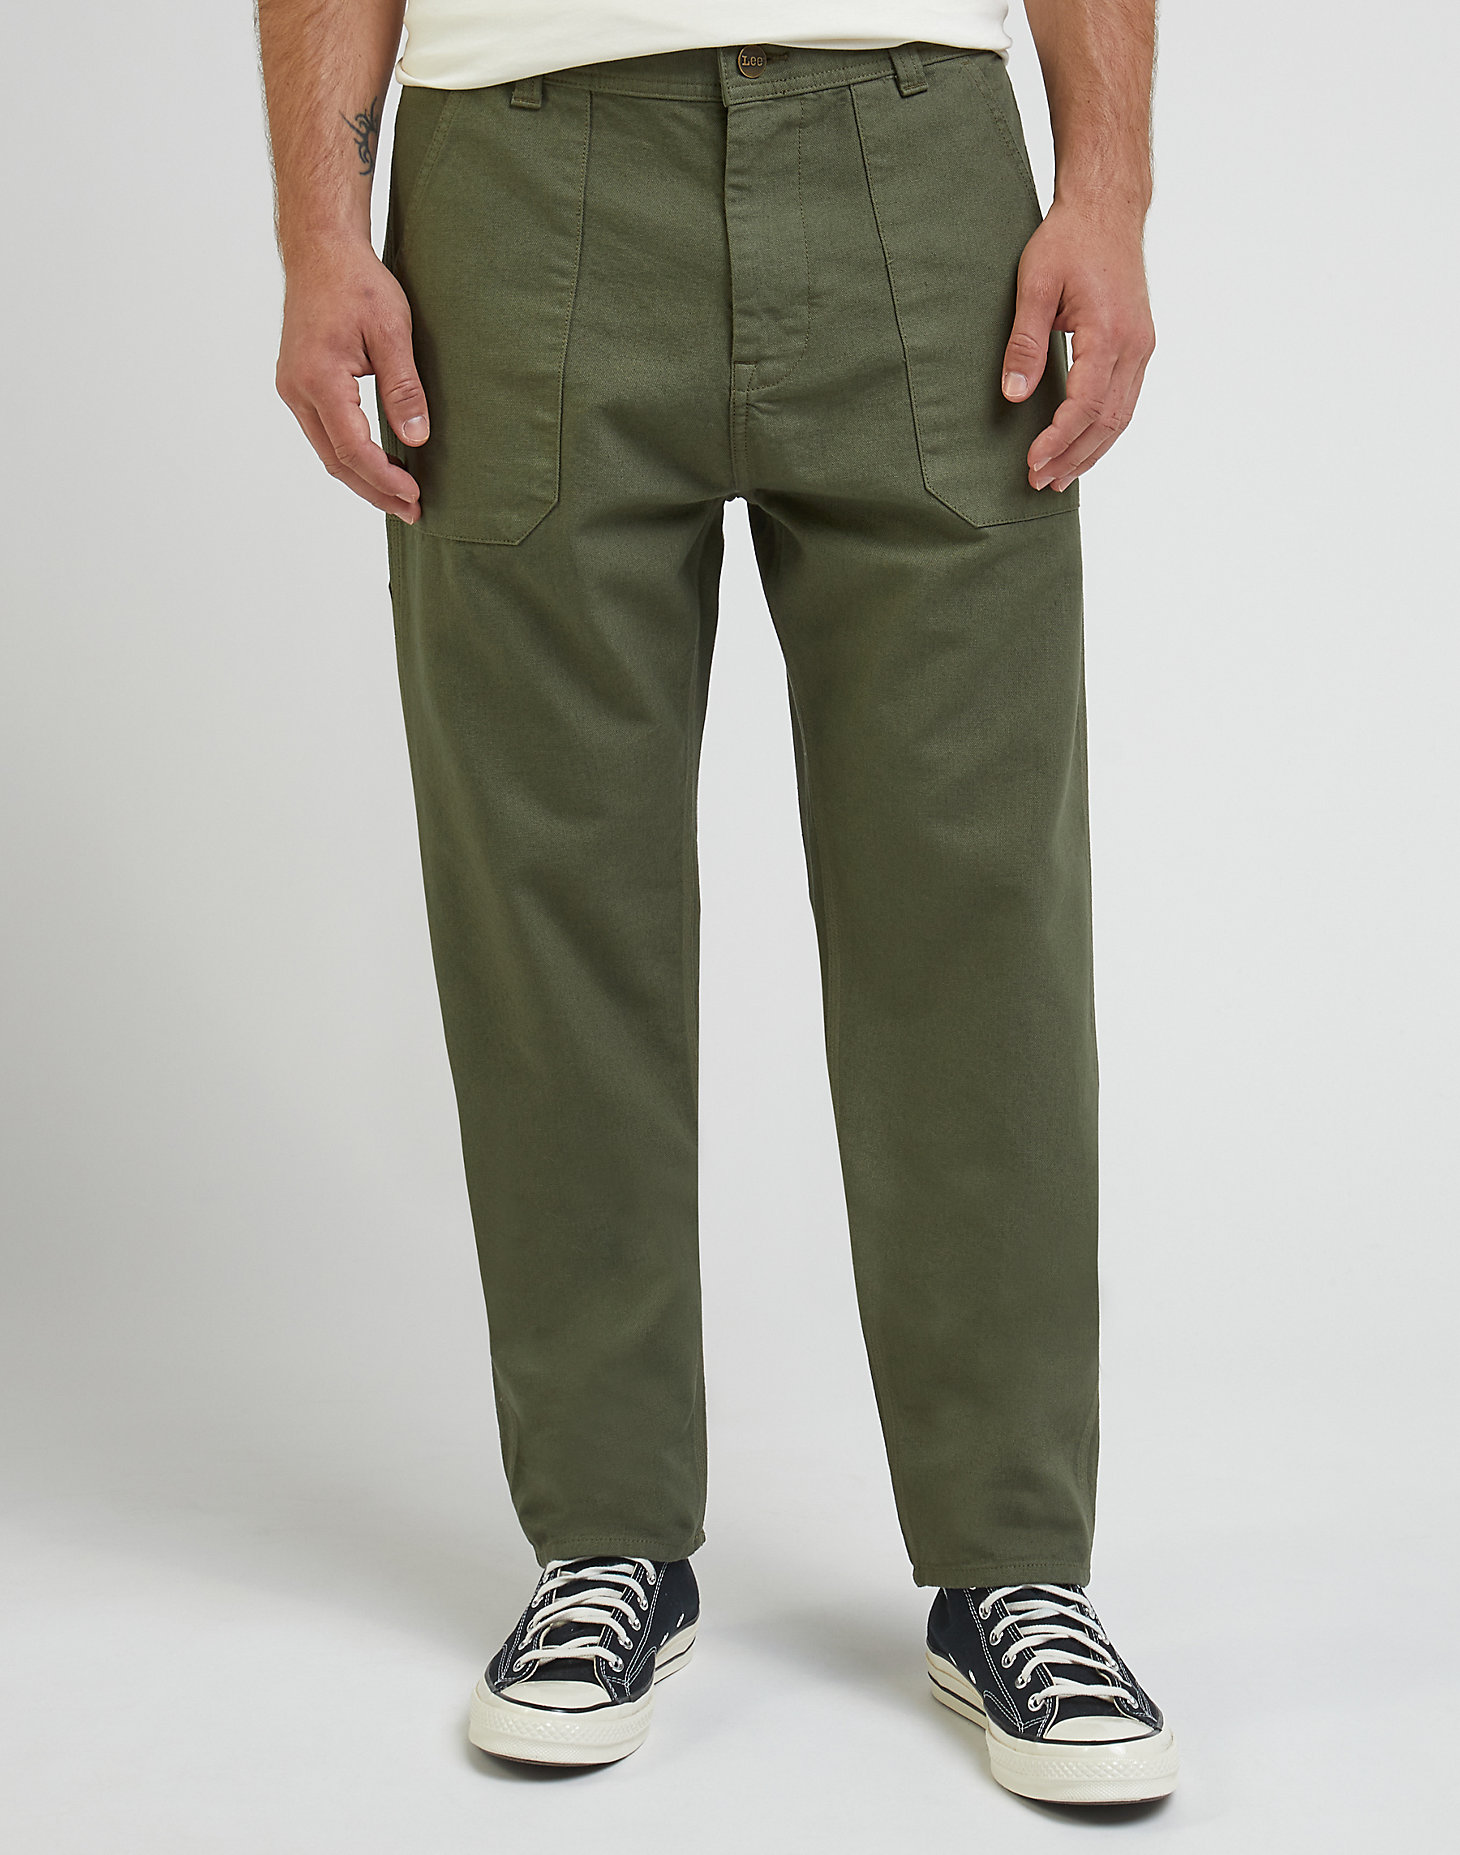 The Fatigue Pants in Olive Grove main view